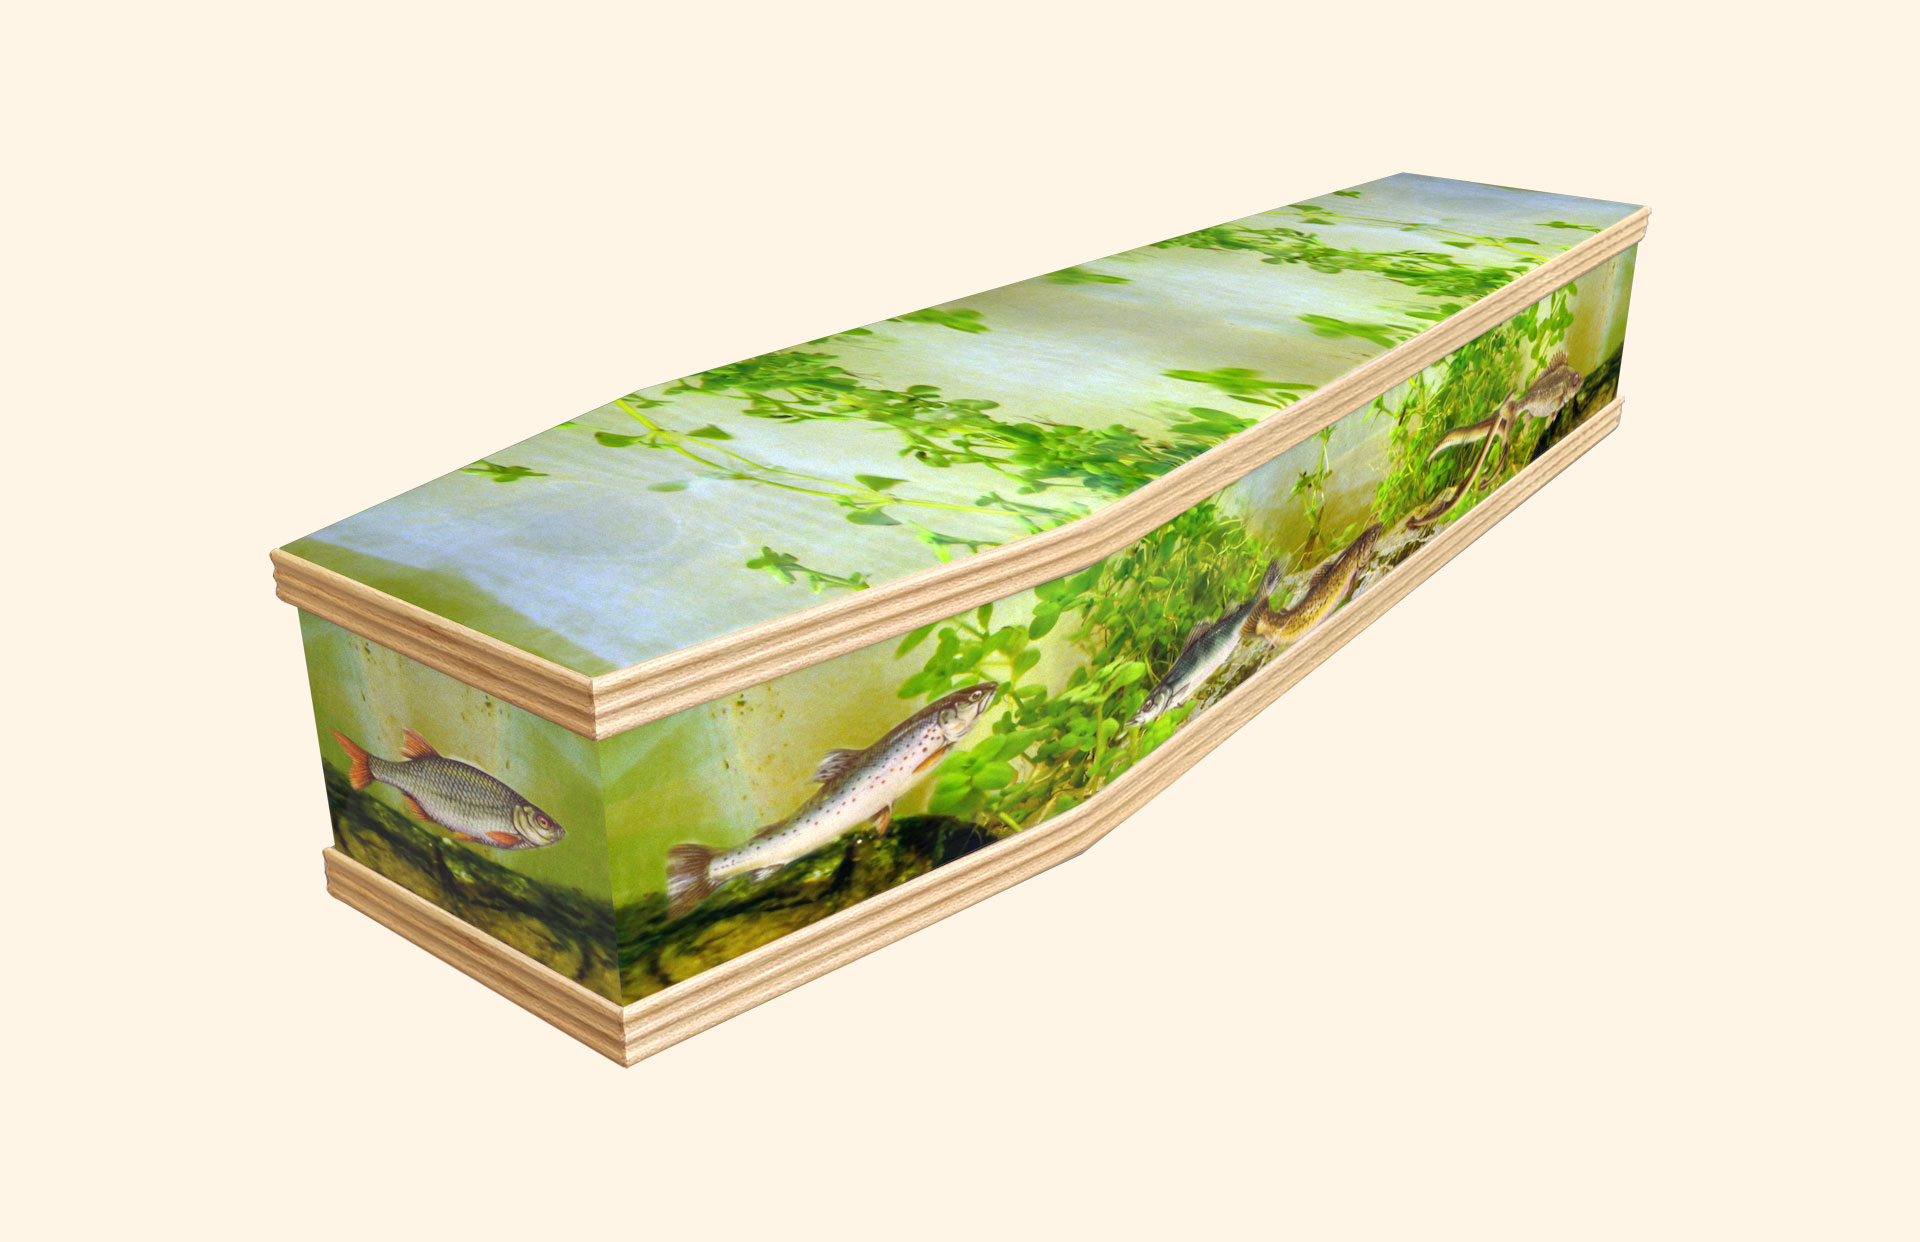 River Bed design on a classic coffin